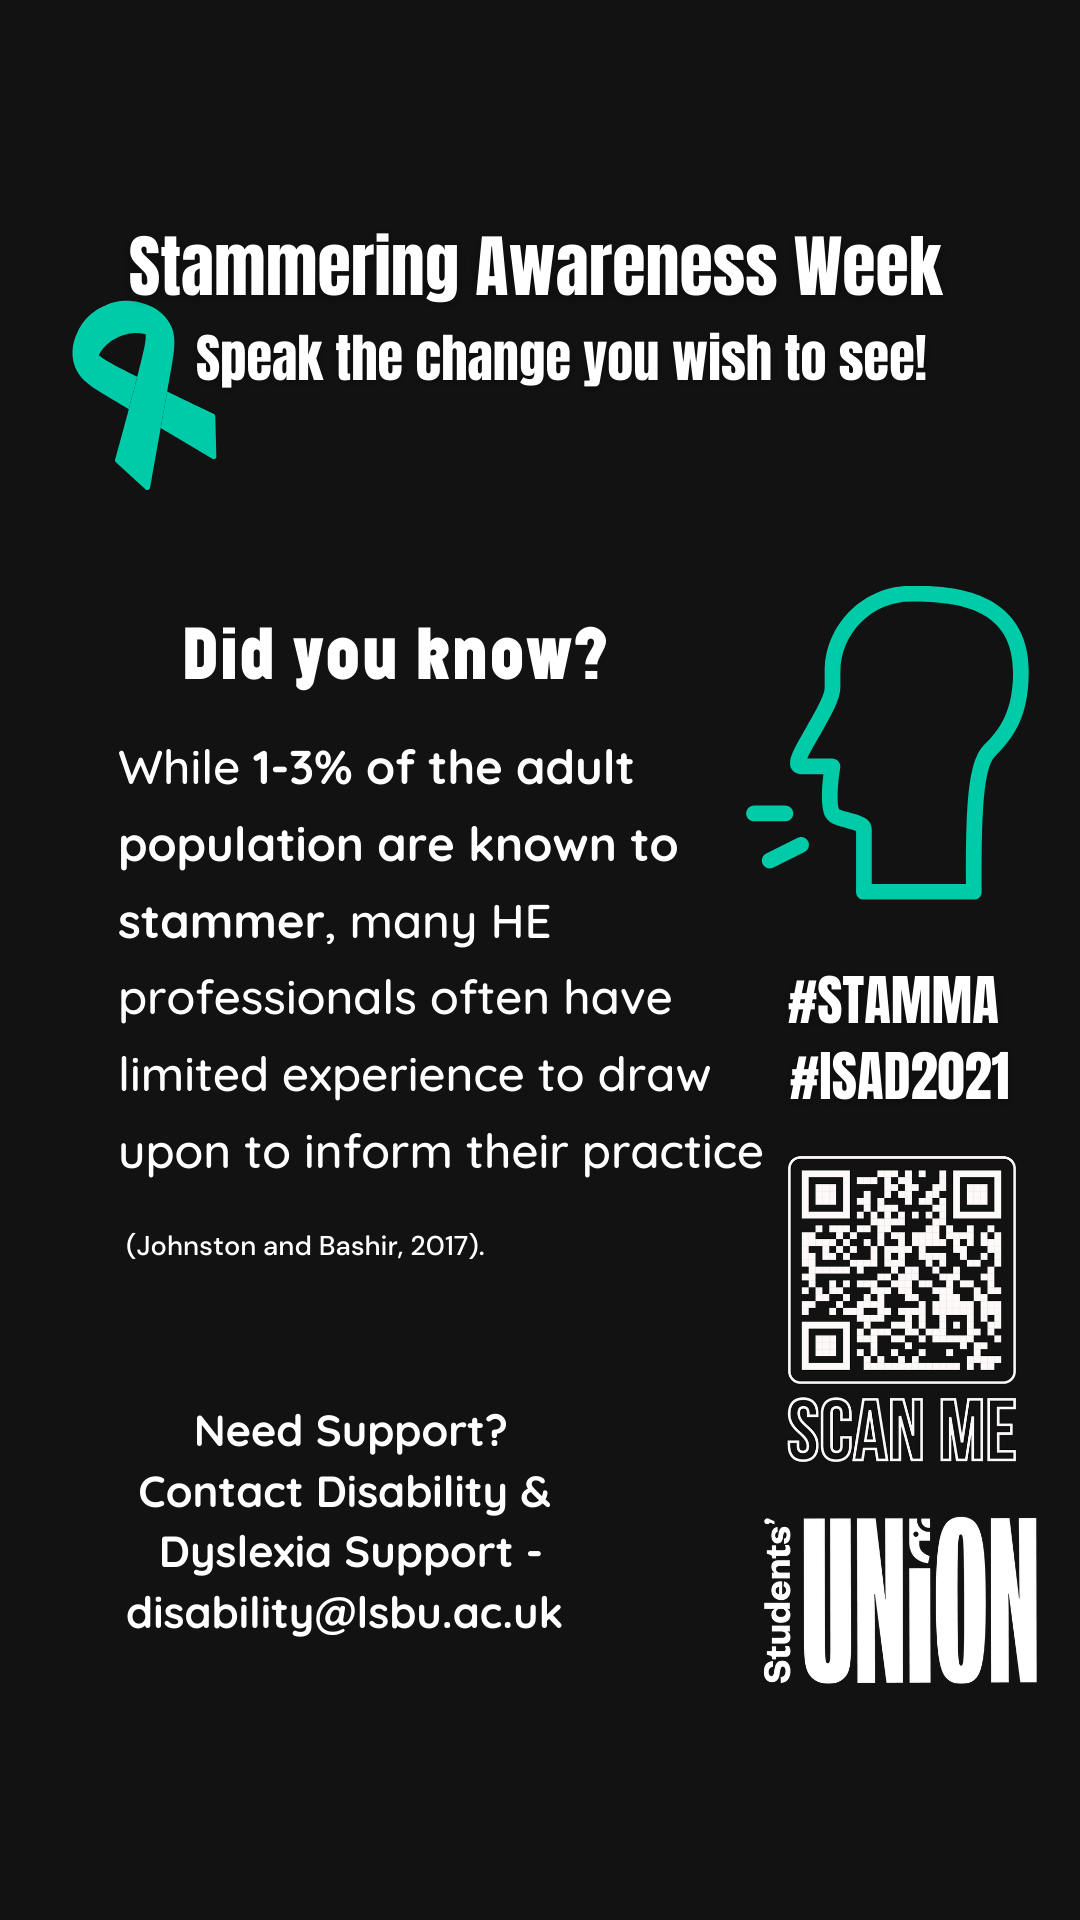 Statistic on Stammering poster: While 1-3% of the adult population are known to stammer, many HE professionals often have limited experience to draw upon to inform their practice . 